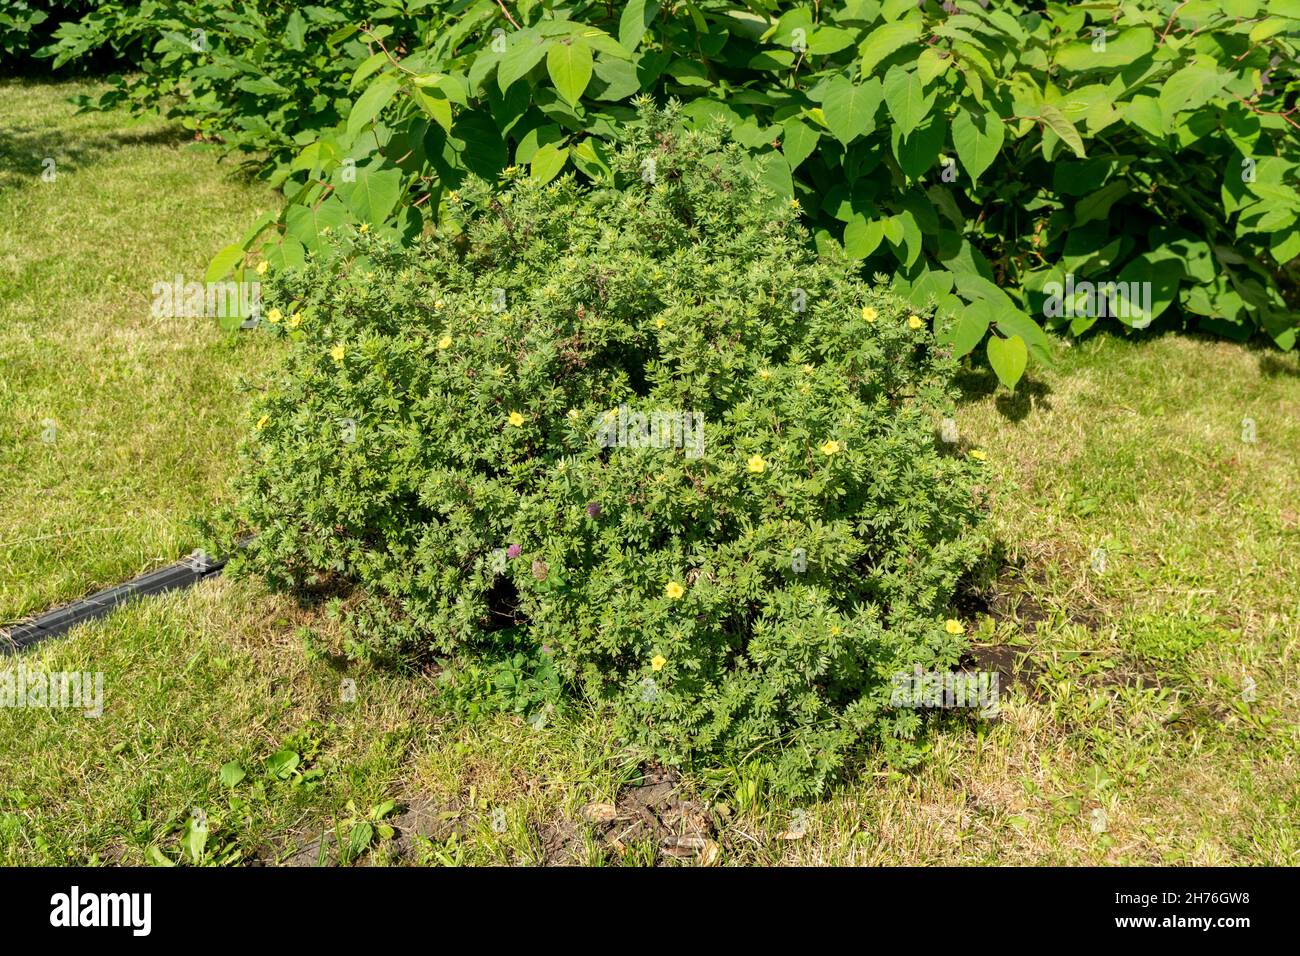 A bush of flowering Kuril tea (Dasiphora Raf.), Potentilla L. or Pentaphylloides fruticosa grows on the lawn on a sunny summer day. Stock Photo